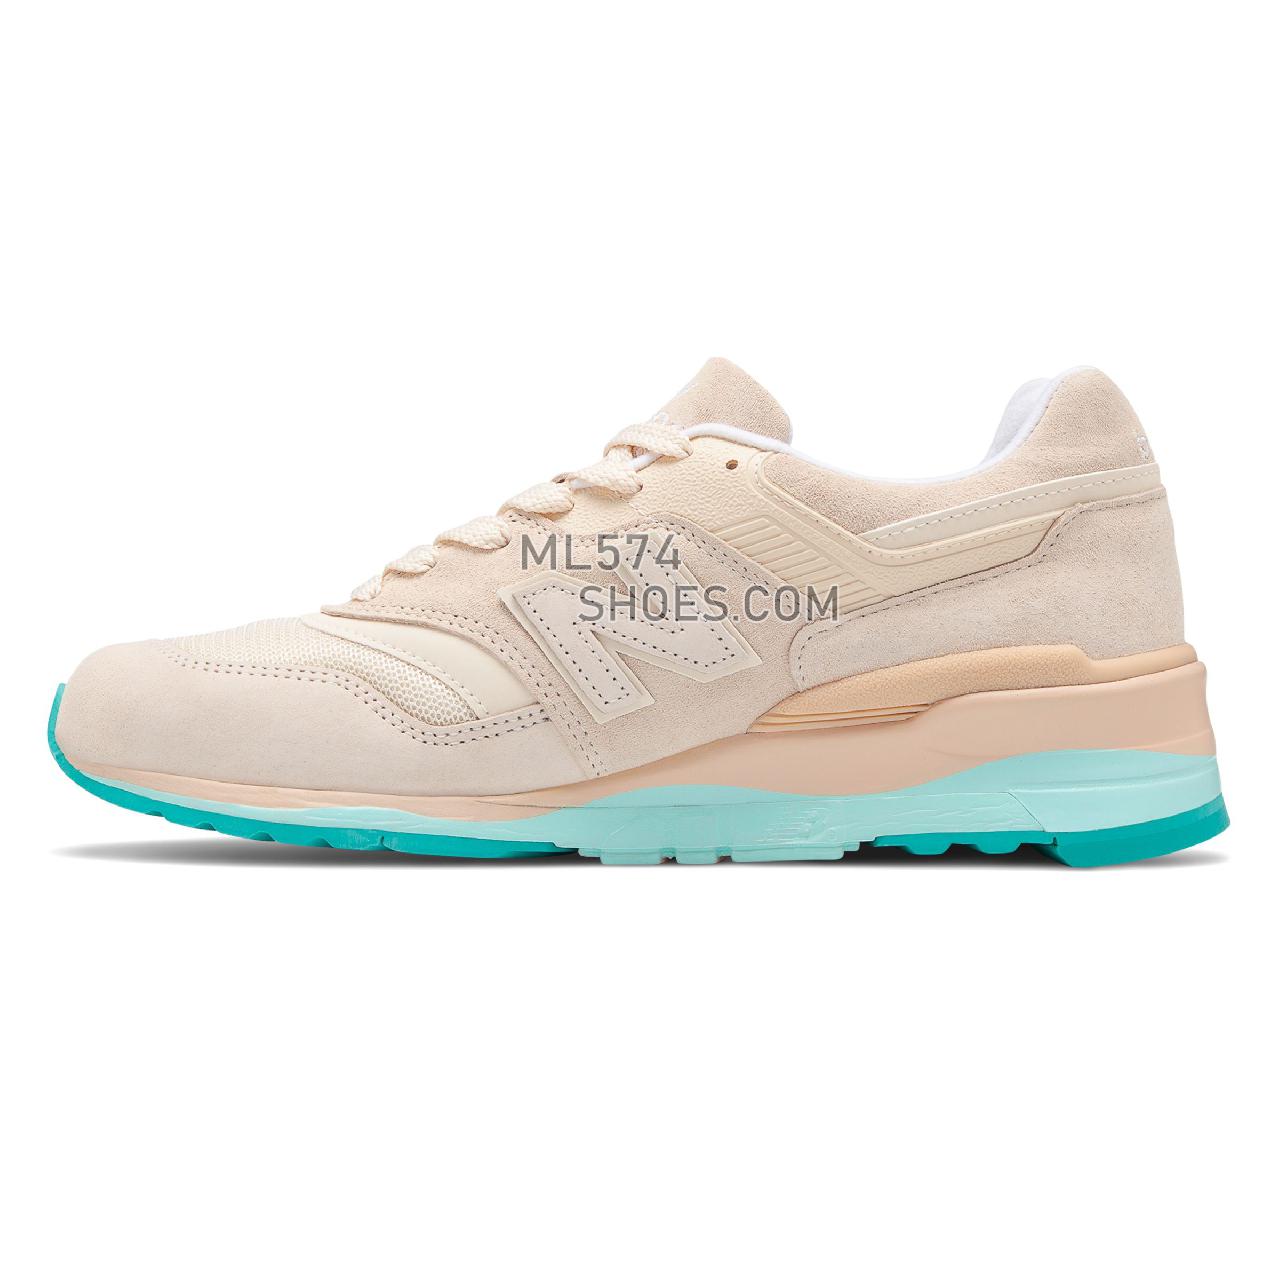 New Balance Made in US 997 - Men's Made in US 997 - Tan with Blue Agua - M997RSA